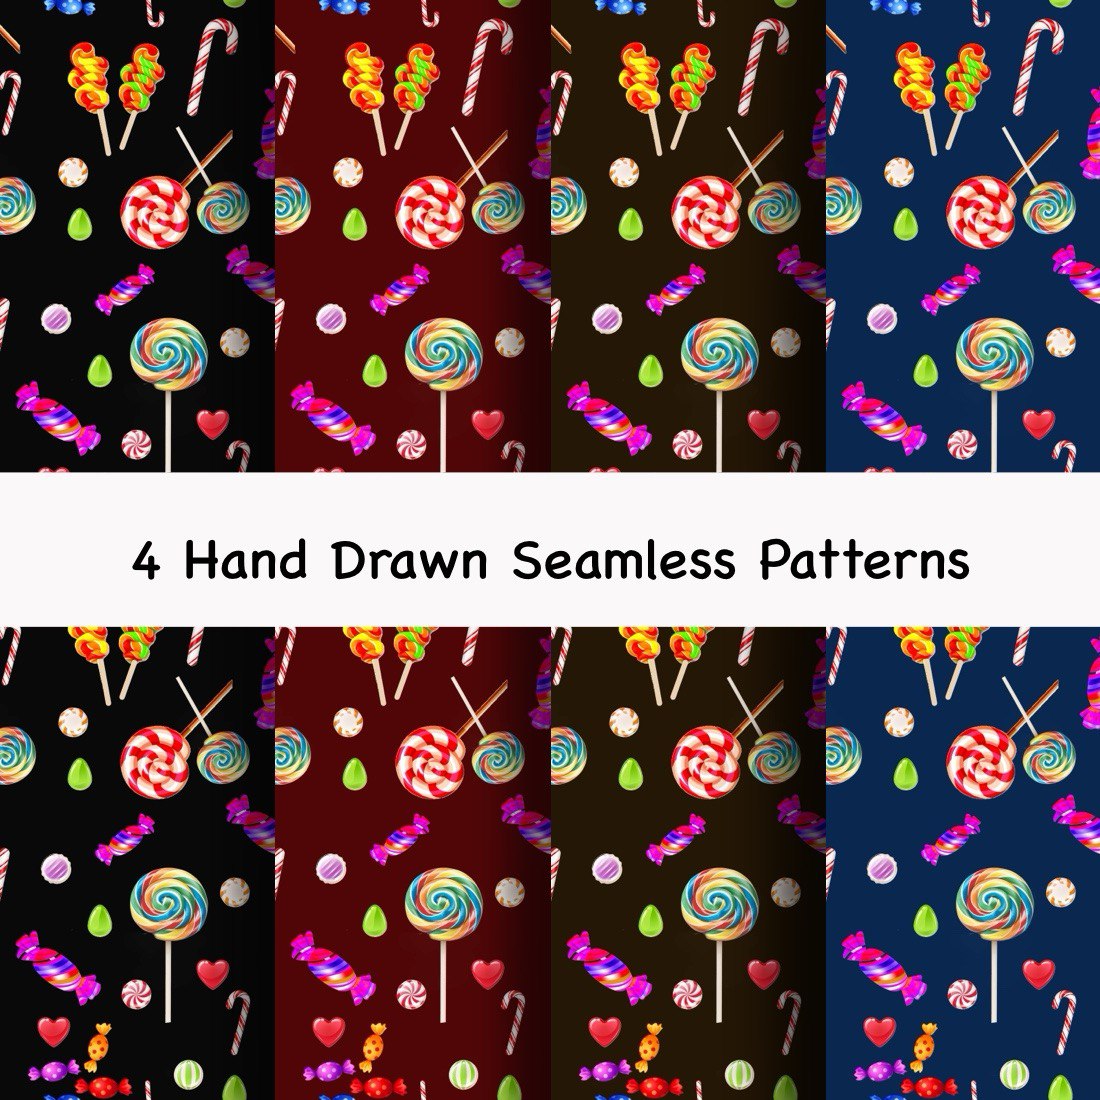 4 Hand Drawn Seamles Patttrns Candy sweets sweet pinterest preview image.